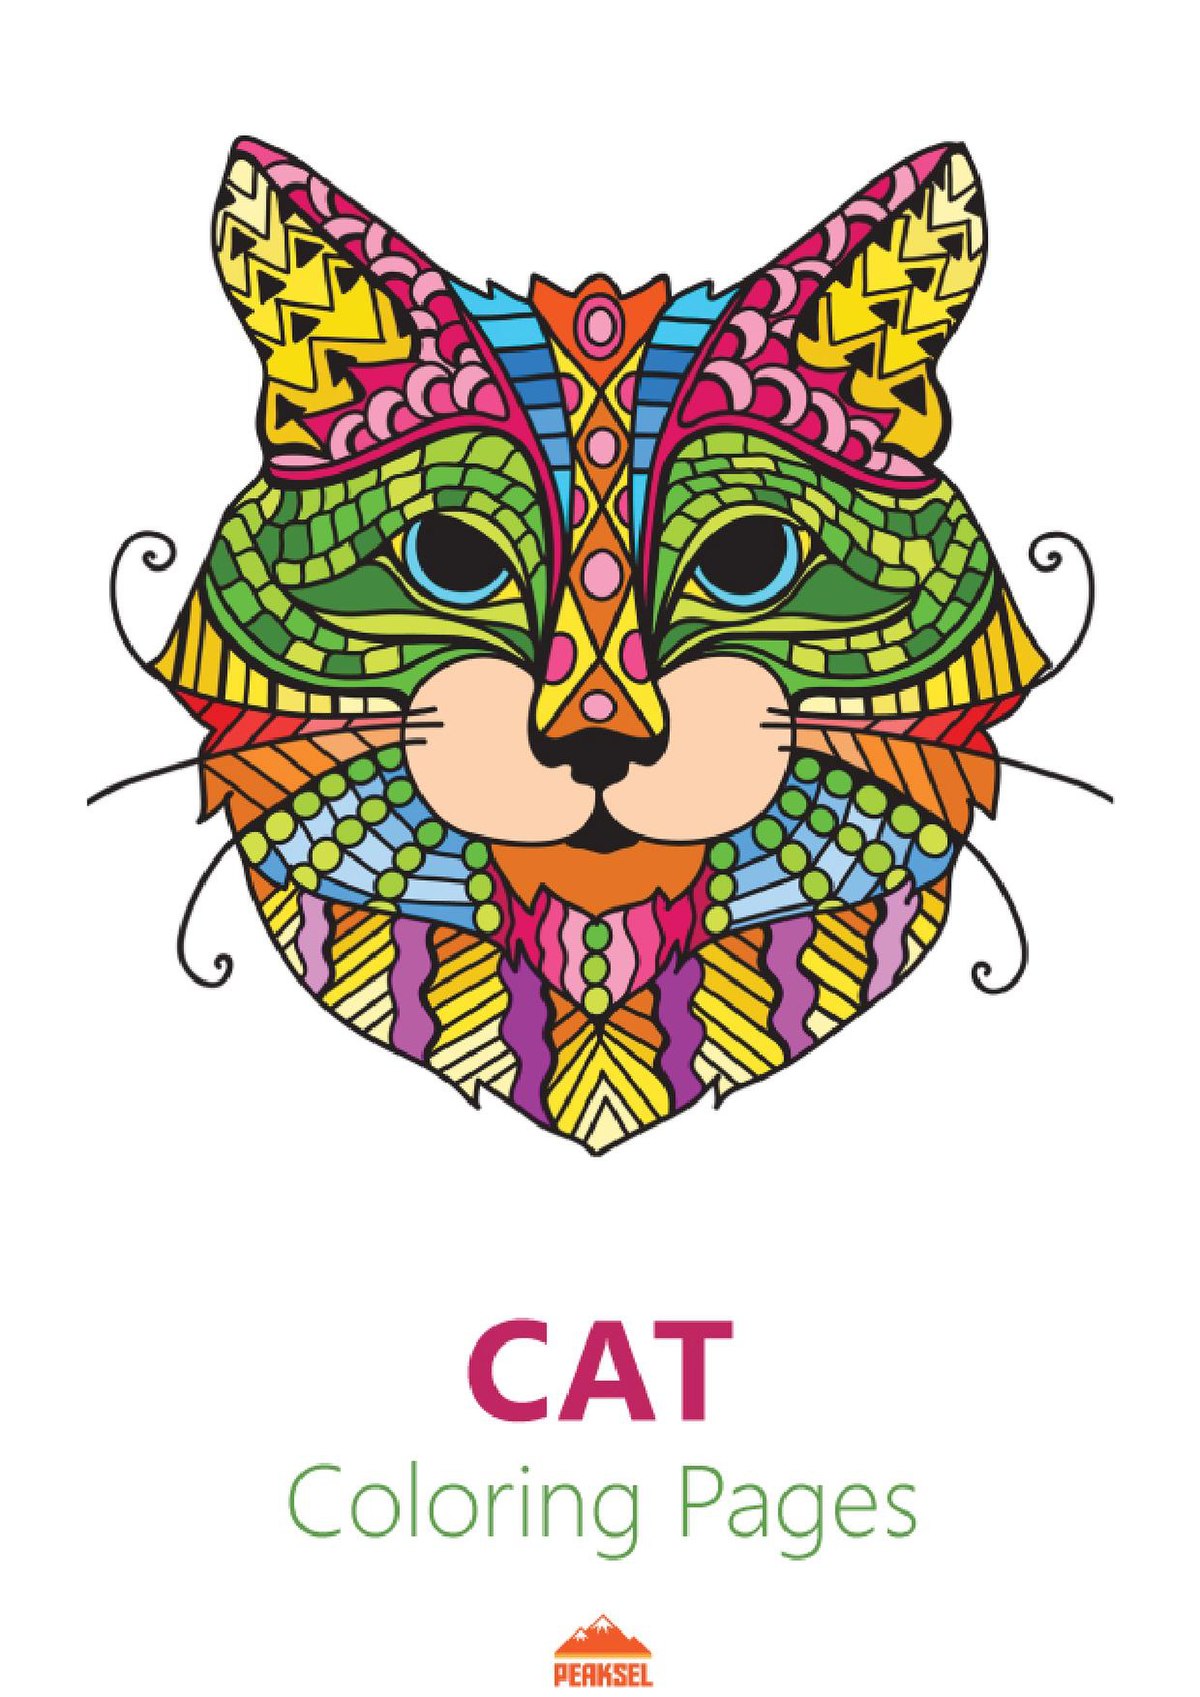 Download File Cat Coloring Pages For Adults Printable Coloring Book Pdf Wikimedia Commons